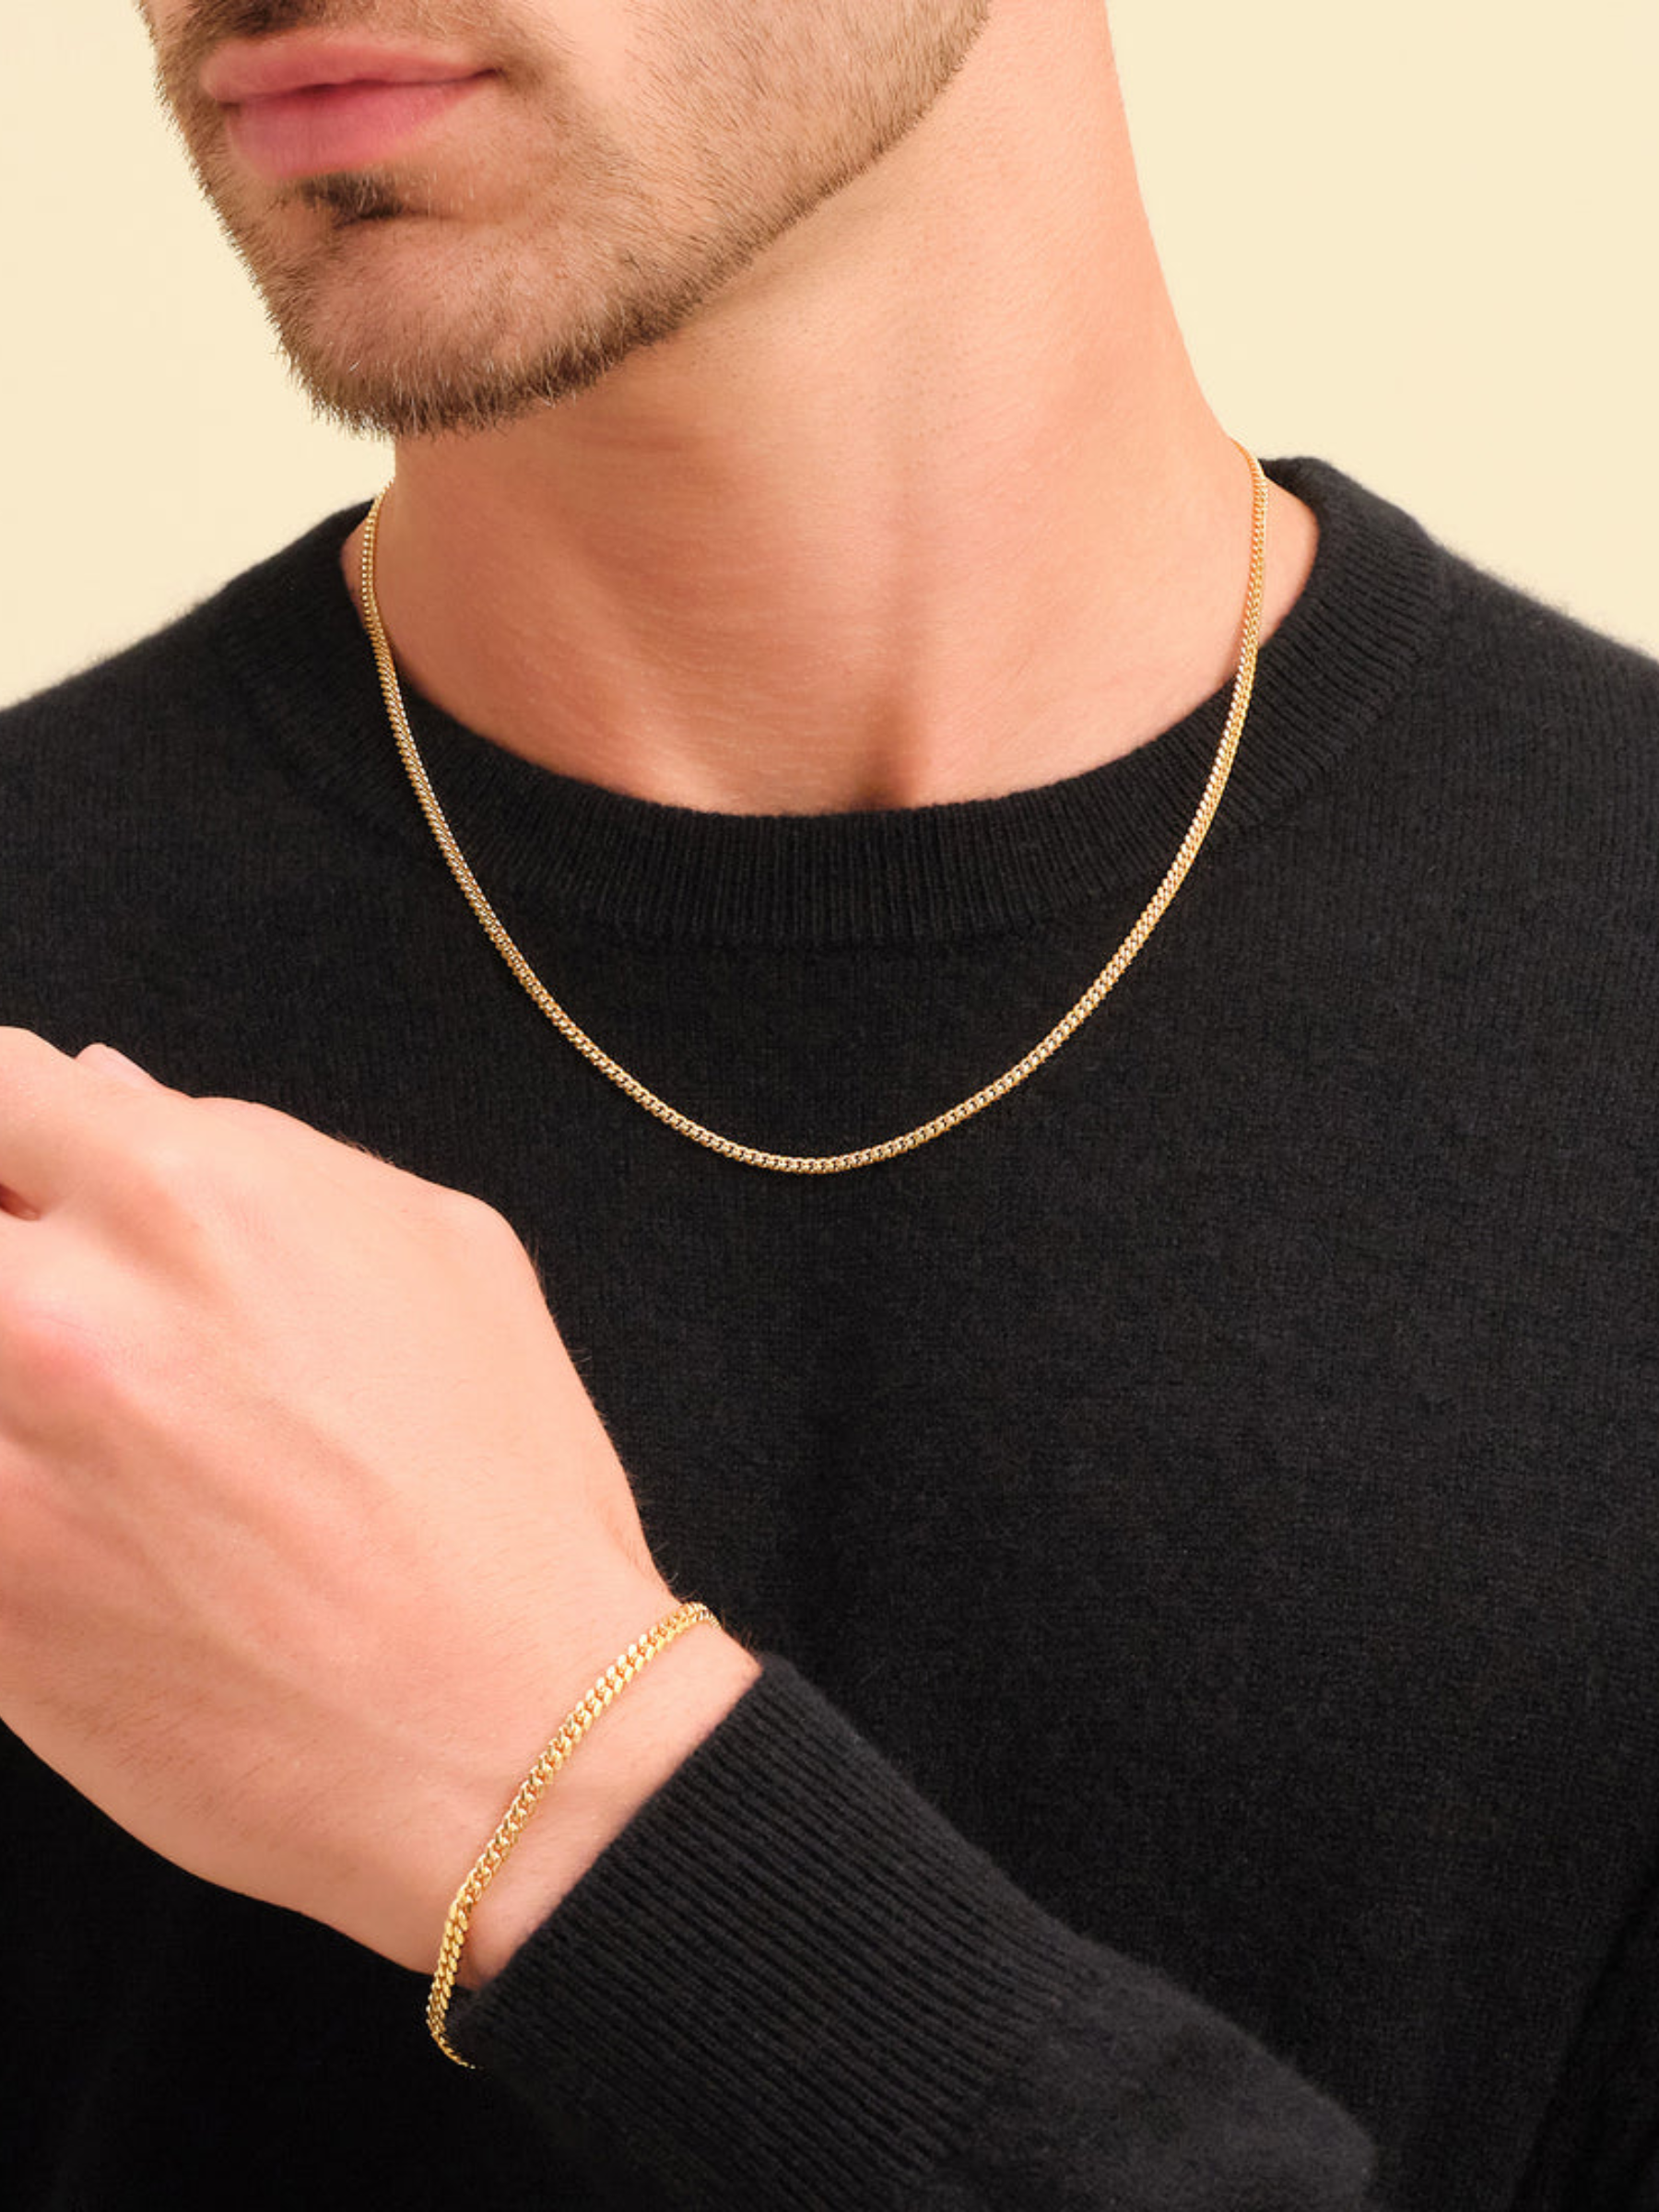 Here’s a starter set for subtle accessorizing. The necklace and bracelet duo feature a Cuban link design and is made of 925 sterling silver that’s then coated in 14K solid gold. $218, Jaxxon. <a href="https://jaxxon.com/products/cuban-3mm-cuban-3mm-set-gold?">Get it now!</a><p>Sign up for today’s biggest stories, from pop culture to politics.</p><a href="https://www.glamour.com/newsletter/news?sourceCode=msnsend">Sign Up</a>